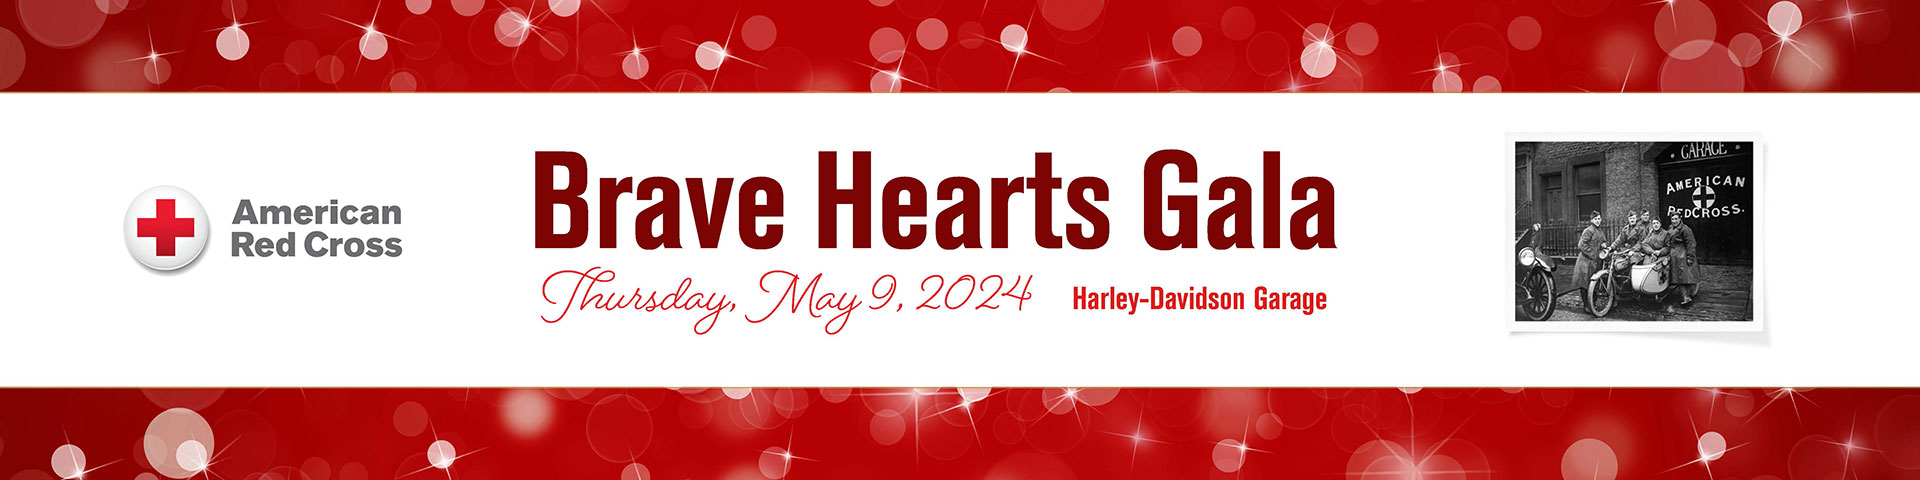 Brave Hearts Gala 2024 Bannner with pic of old Red Cross volunteers on mortorcycle